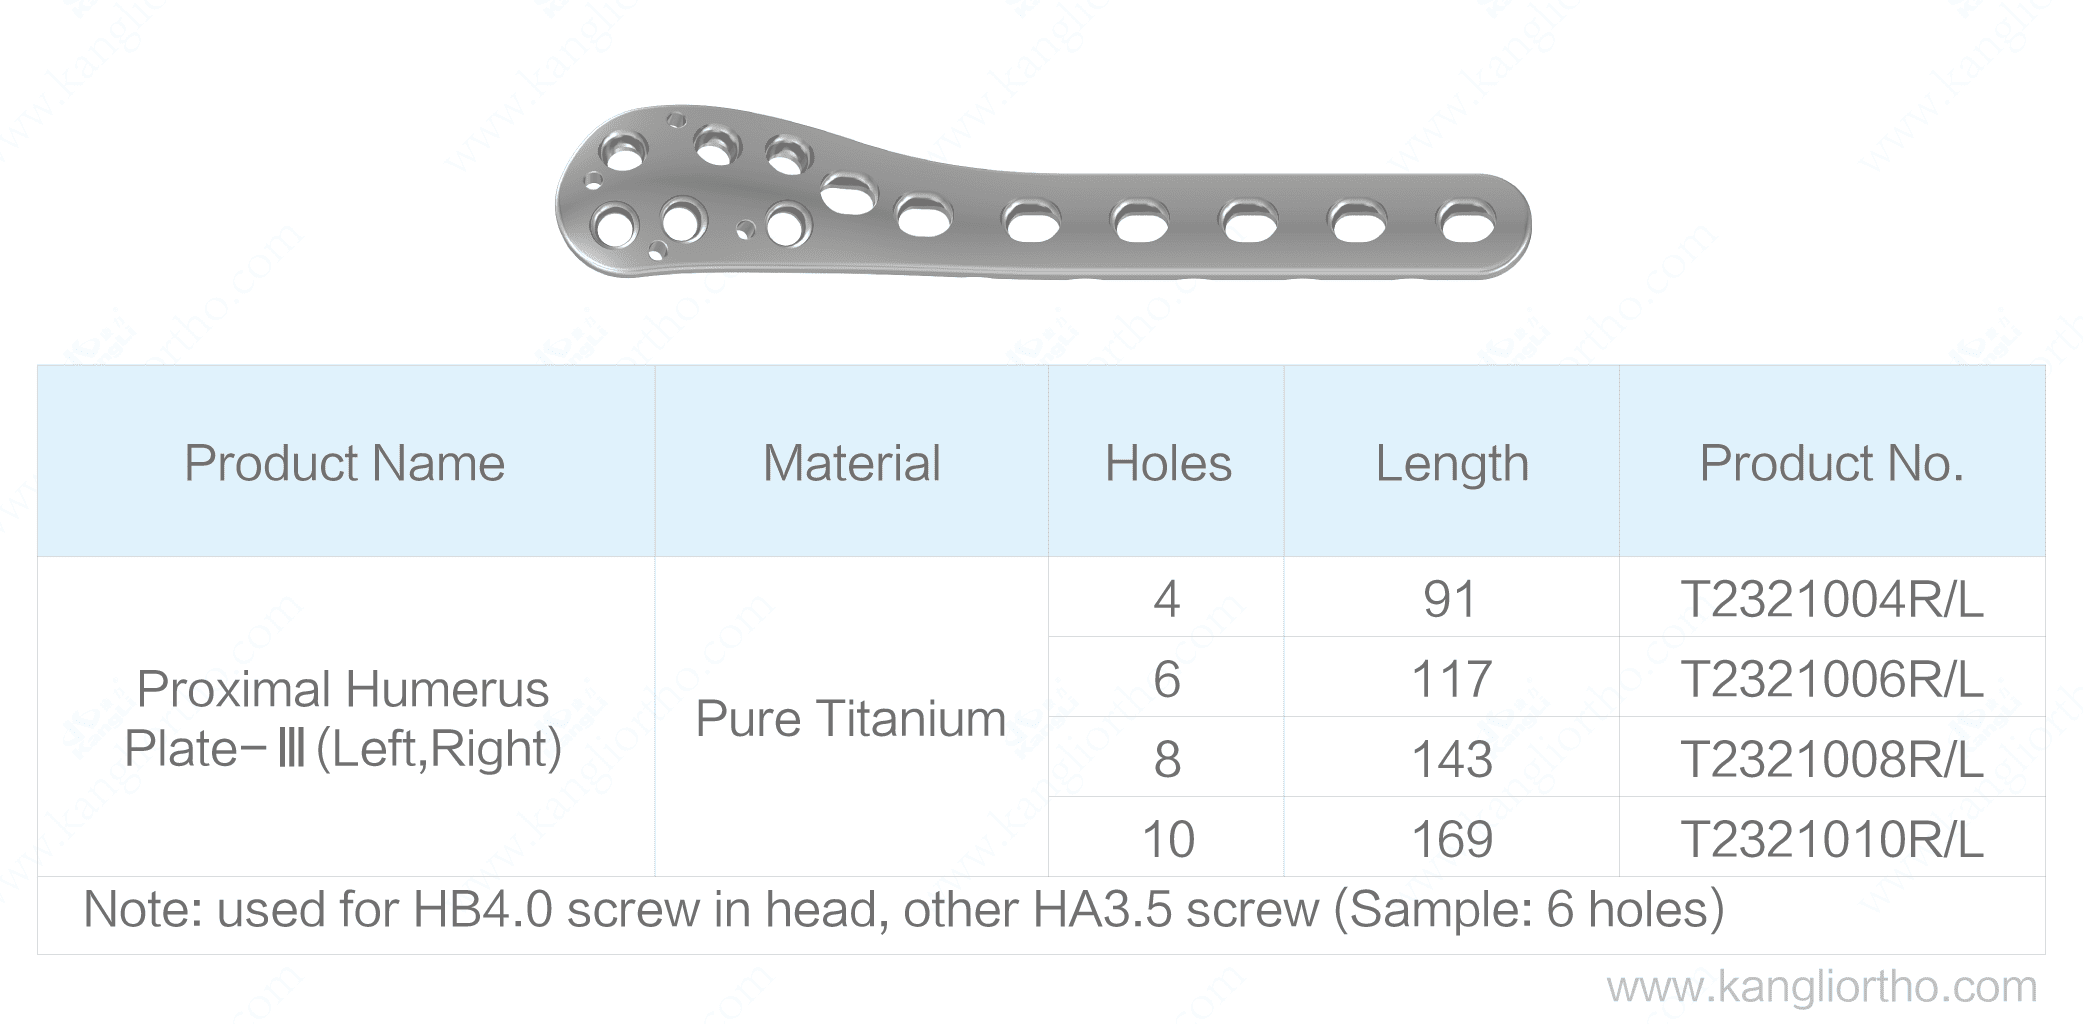 proximal-humerus-plate-iii-specifications